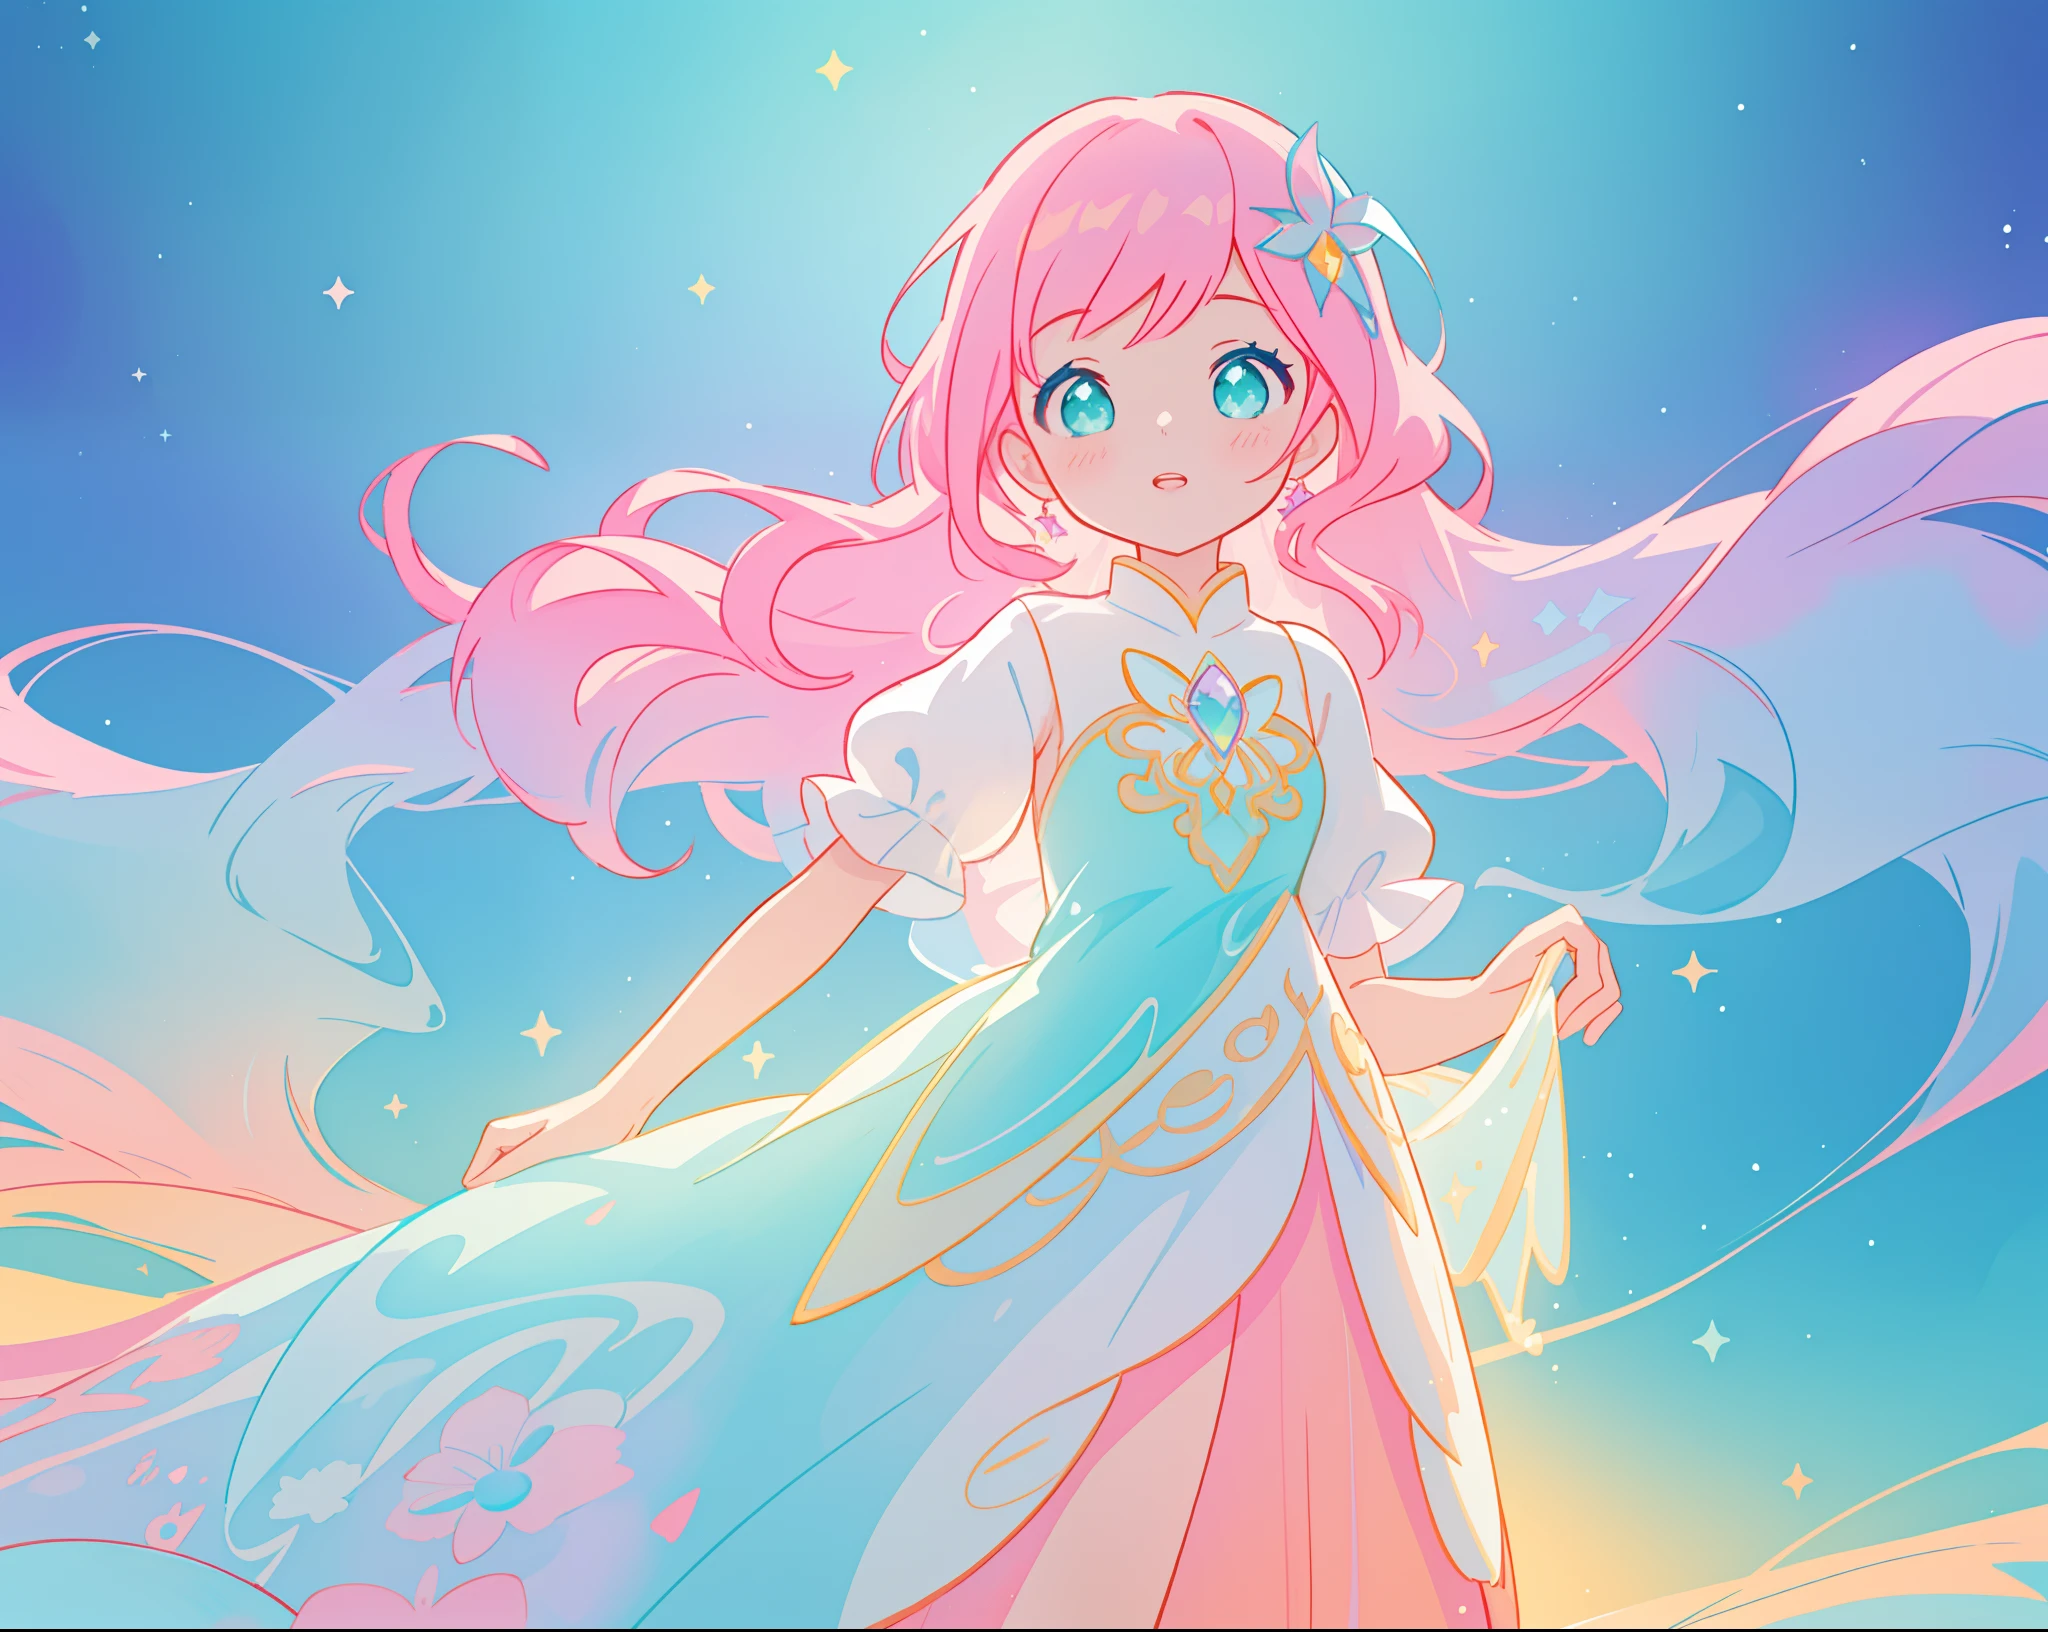 beautiful girl in sparkling white puffy dress, vibrant pastel colors, (colorful), magical lights, long flowing colorful pink hair, otherworldly aqua and blue landscape background, inspired by Glen Keane, inspired by Lois van Baarle, disney art style, by Lois van Baarle, glowing aura around her, by Glen Keane, jen bartel, glowing lights! digital painting, flowing glowing hair, glowing flowing hair, beautiful digital illustration, fantasia background, whimsical, magical, fantasy, beautiful face, ((masterpiece, best quality)), intricate details, highly detailed, sharp focus, 8k resolution, sparkling detailed eyes, liquid watercolor